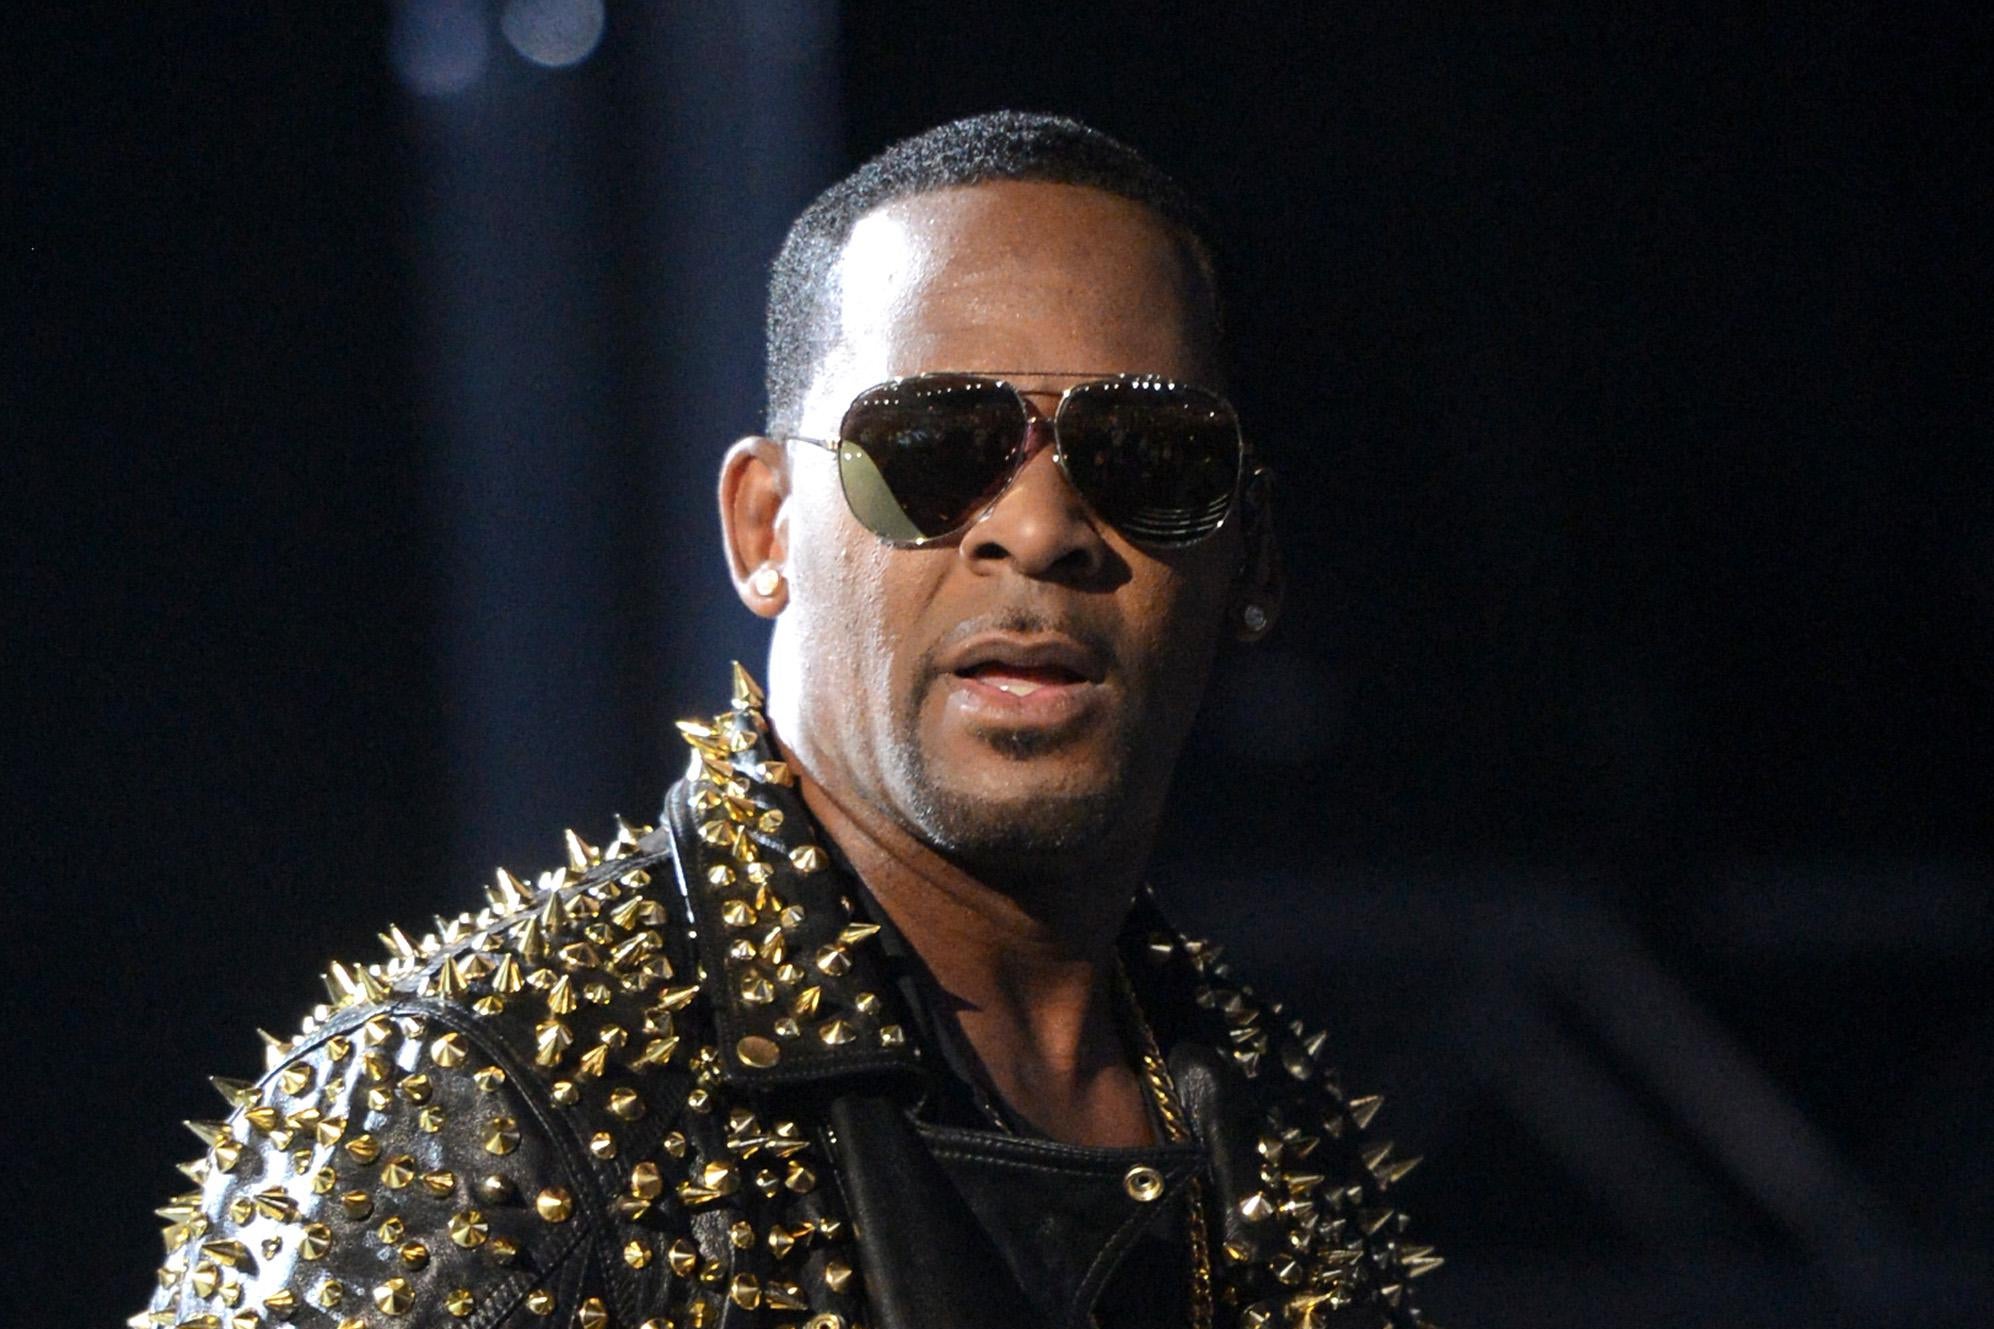 R. Kelly performs in studded black leather jacket and sunglasses. 